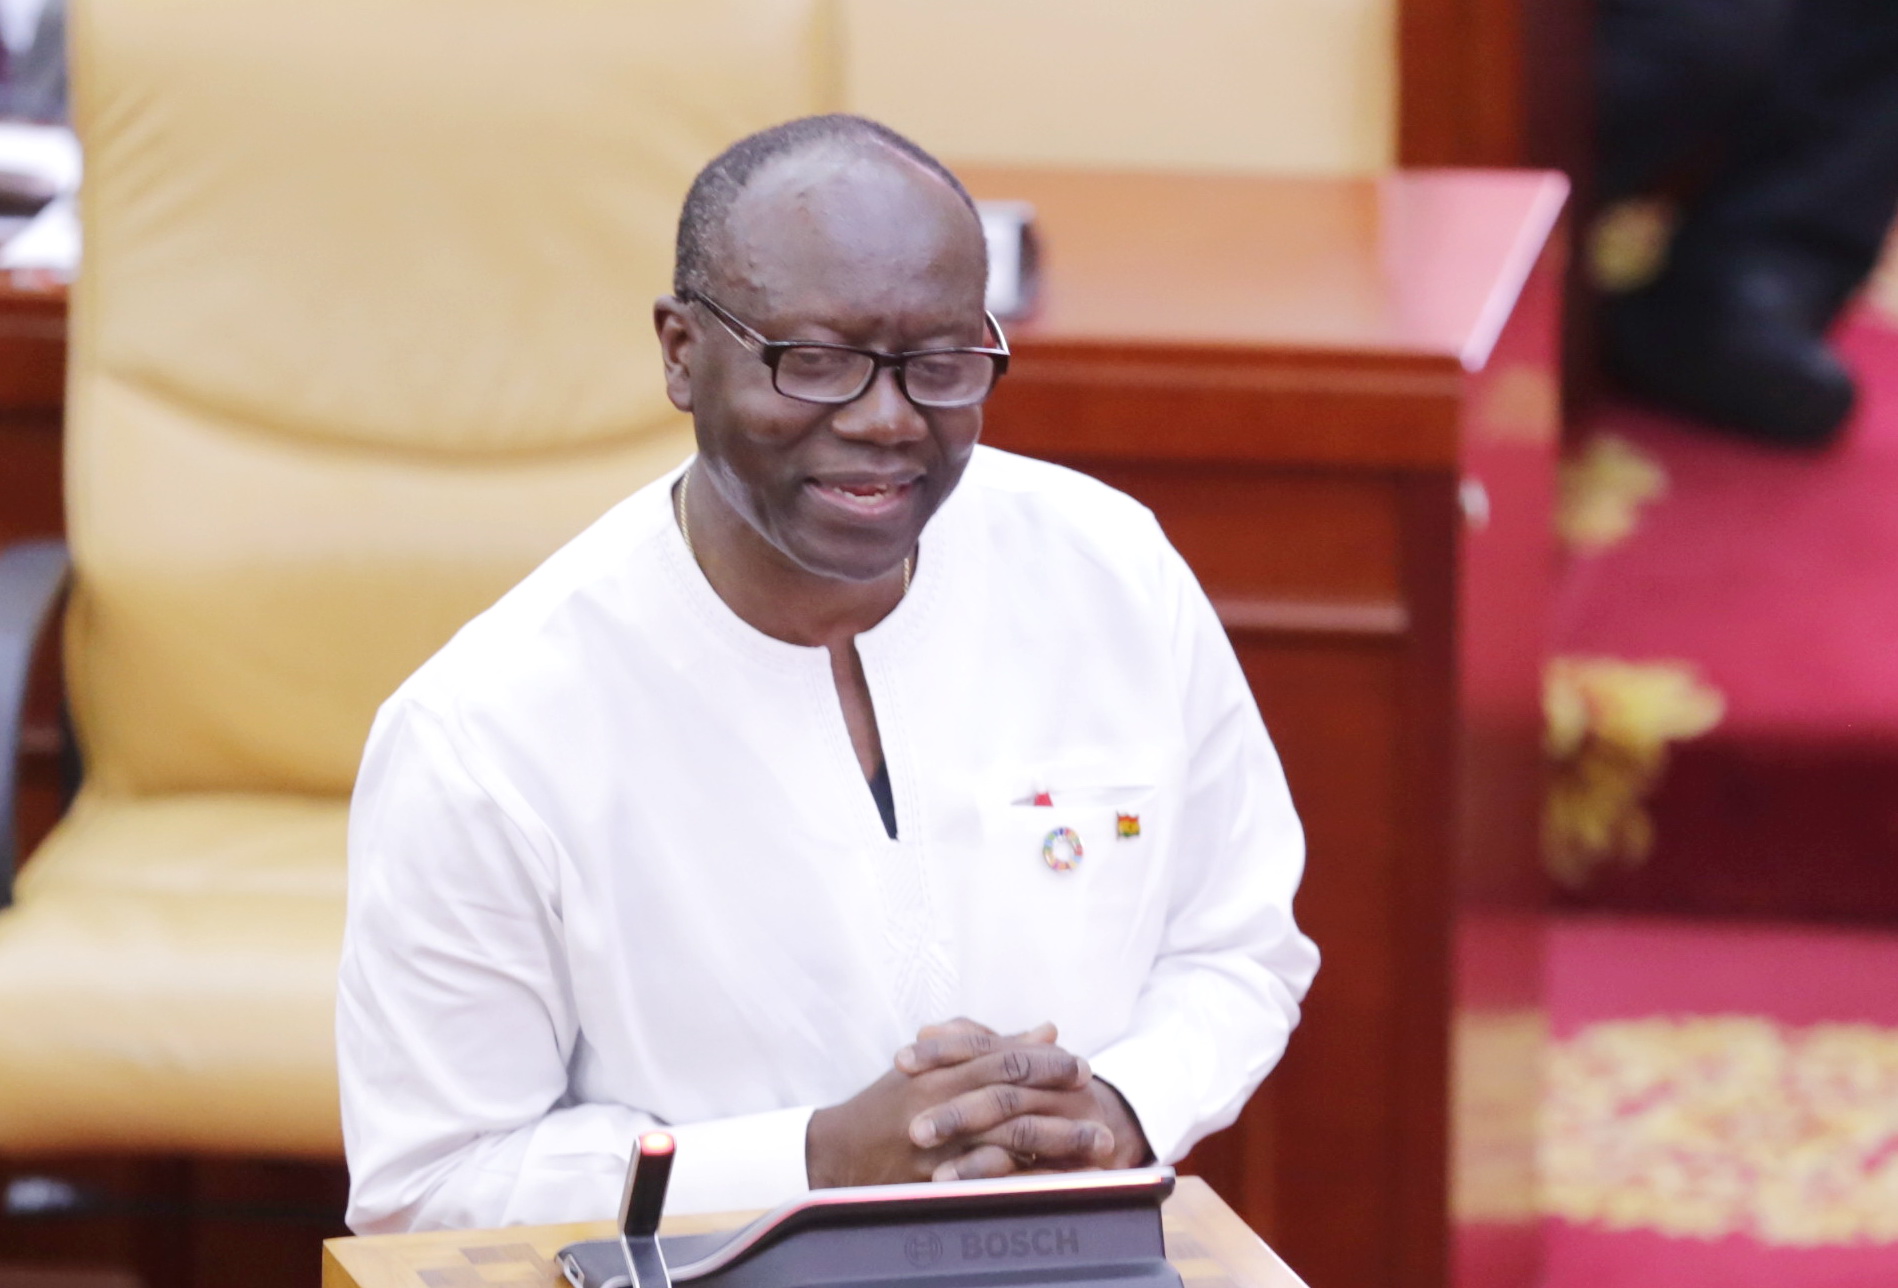 Ken Ofori Atta speaks on China’s cocoa production, export plans